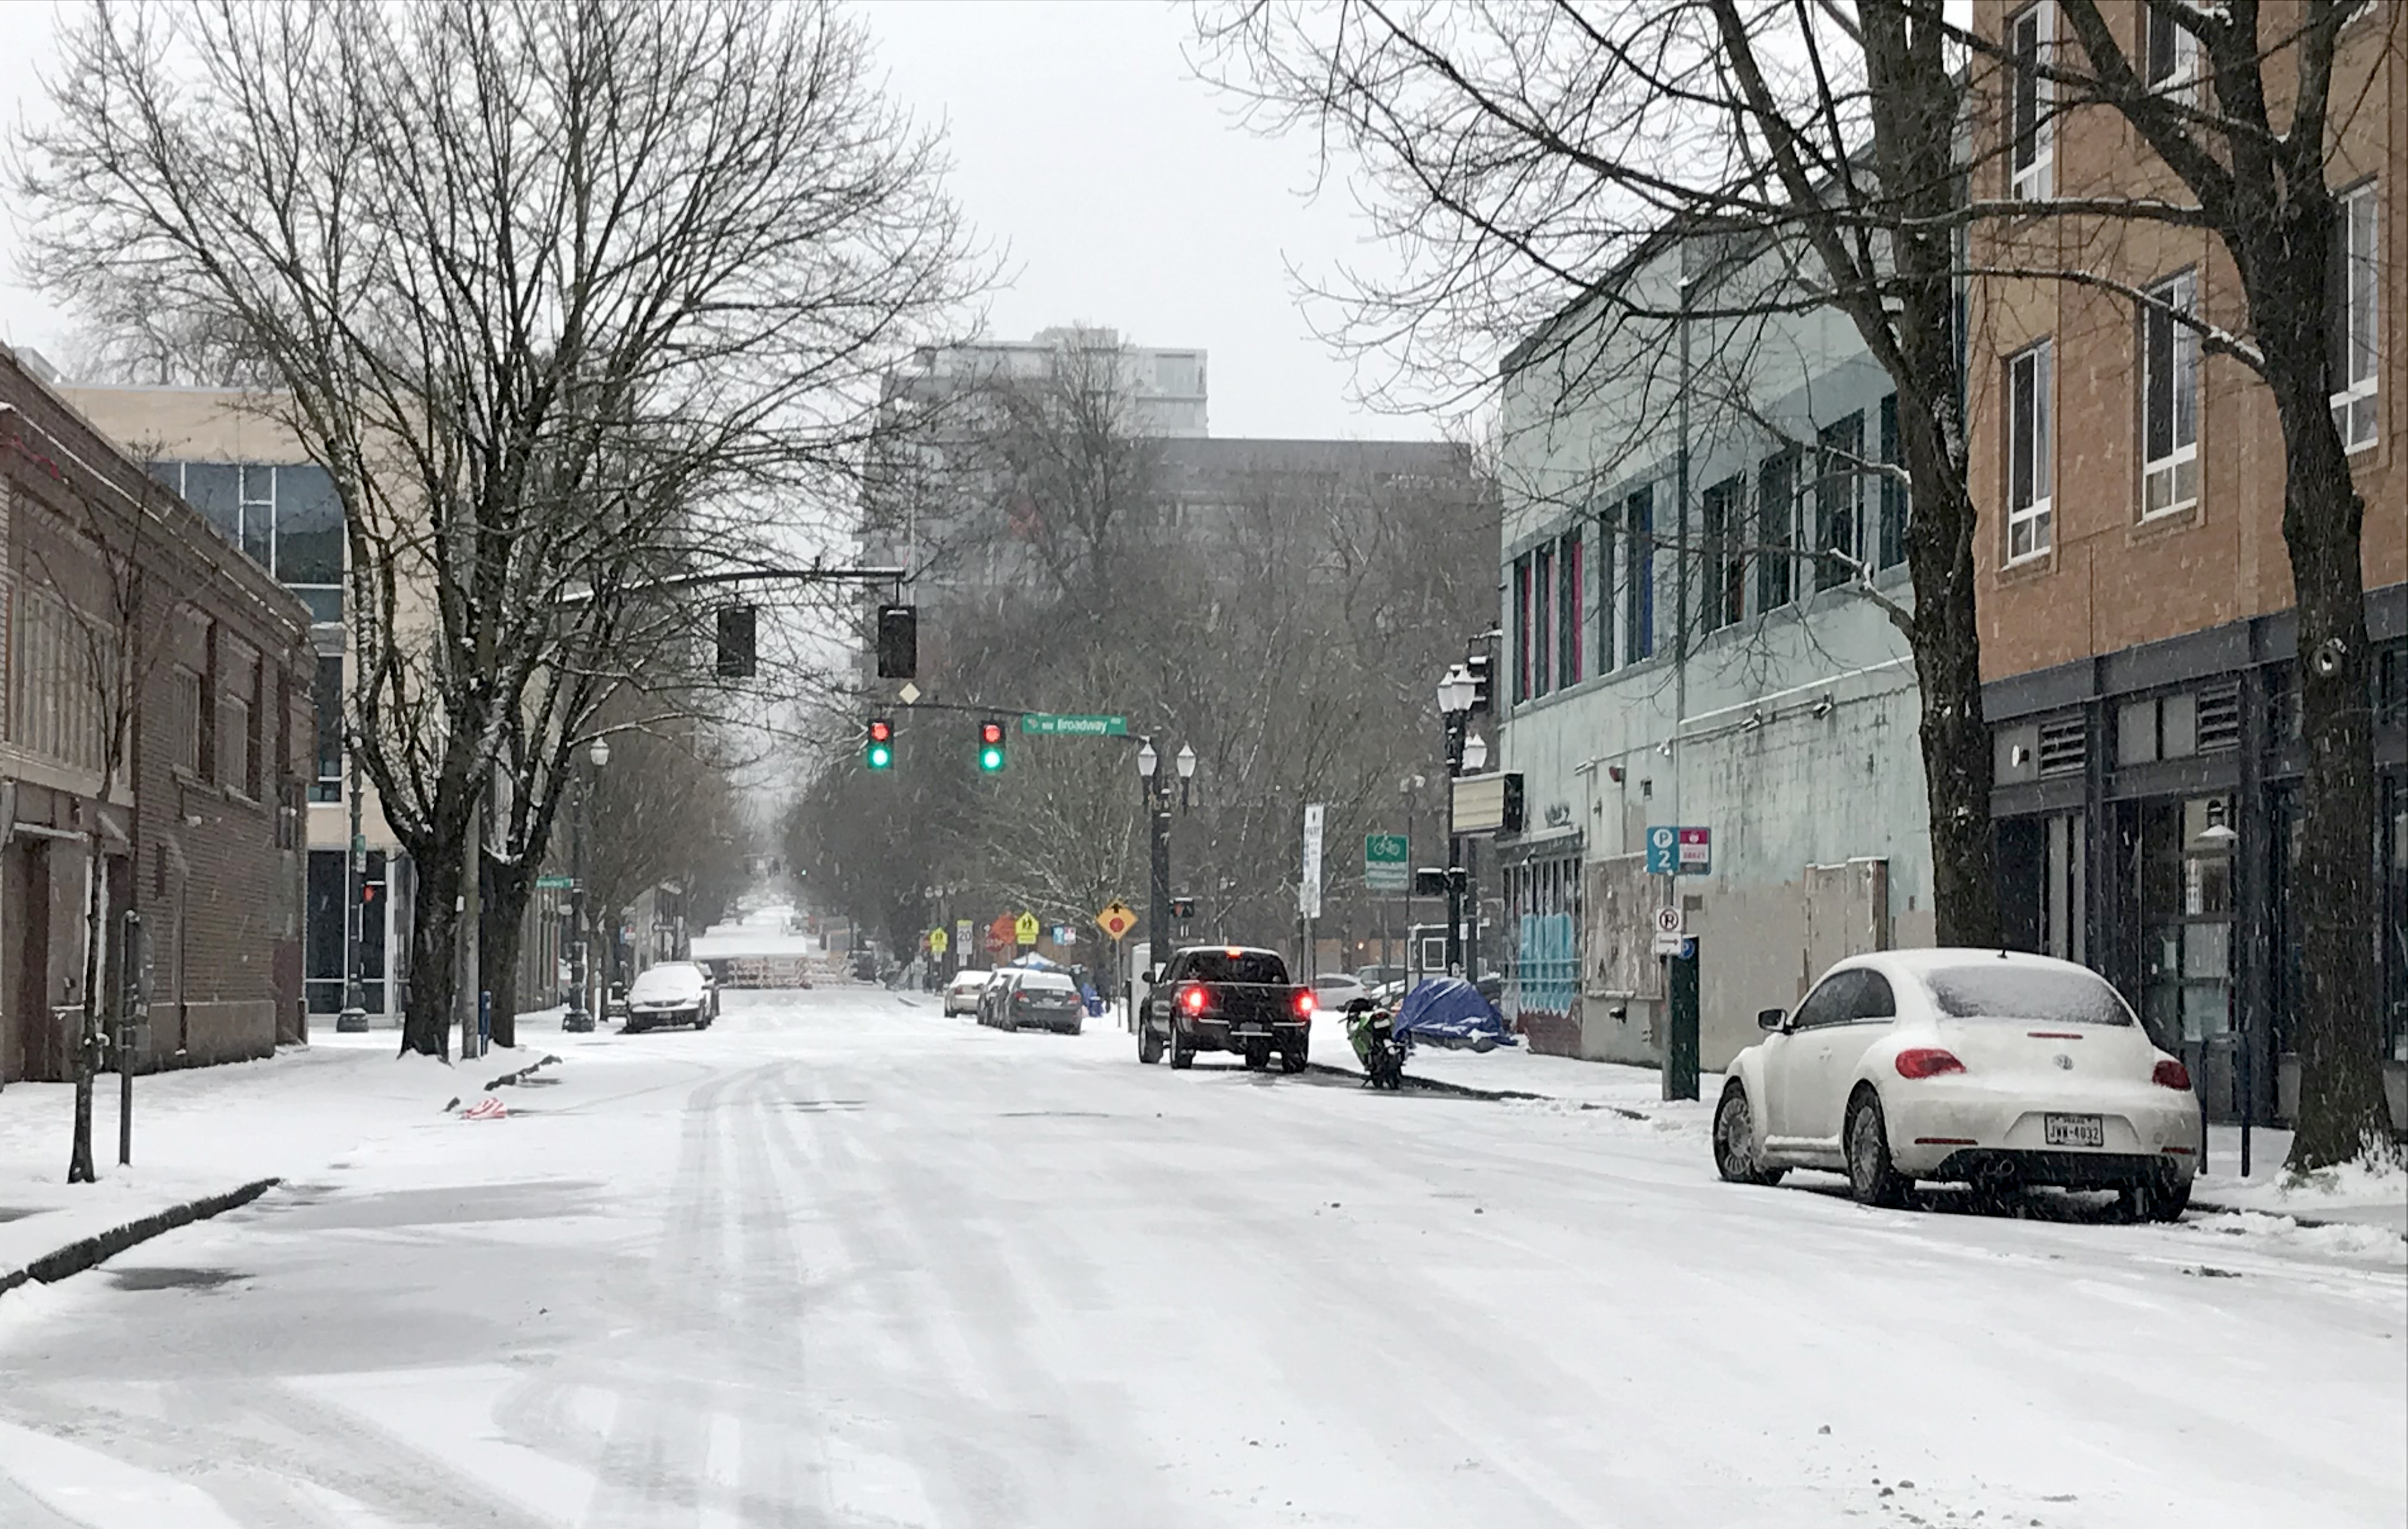 Multnomah County declares emergency with deadly low temperatures forecast starting Wednesday - OPB